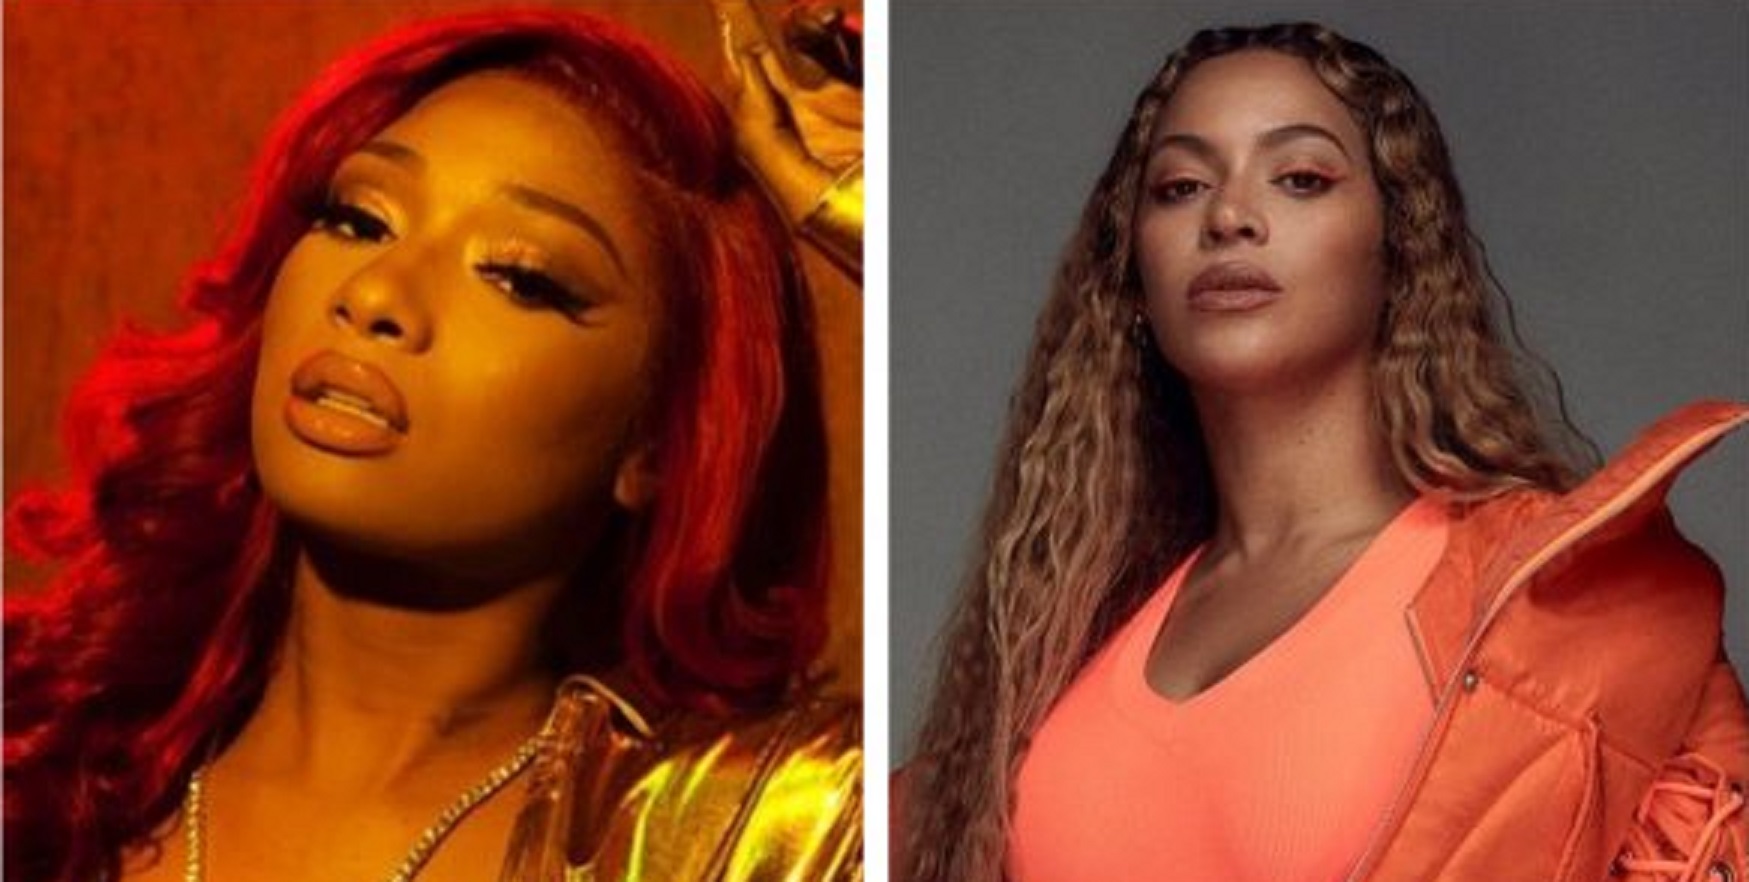 Listen To Megan Thee Stallion’s New Remix of ‘Savage’ Featuring Beyonce!